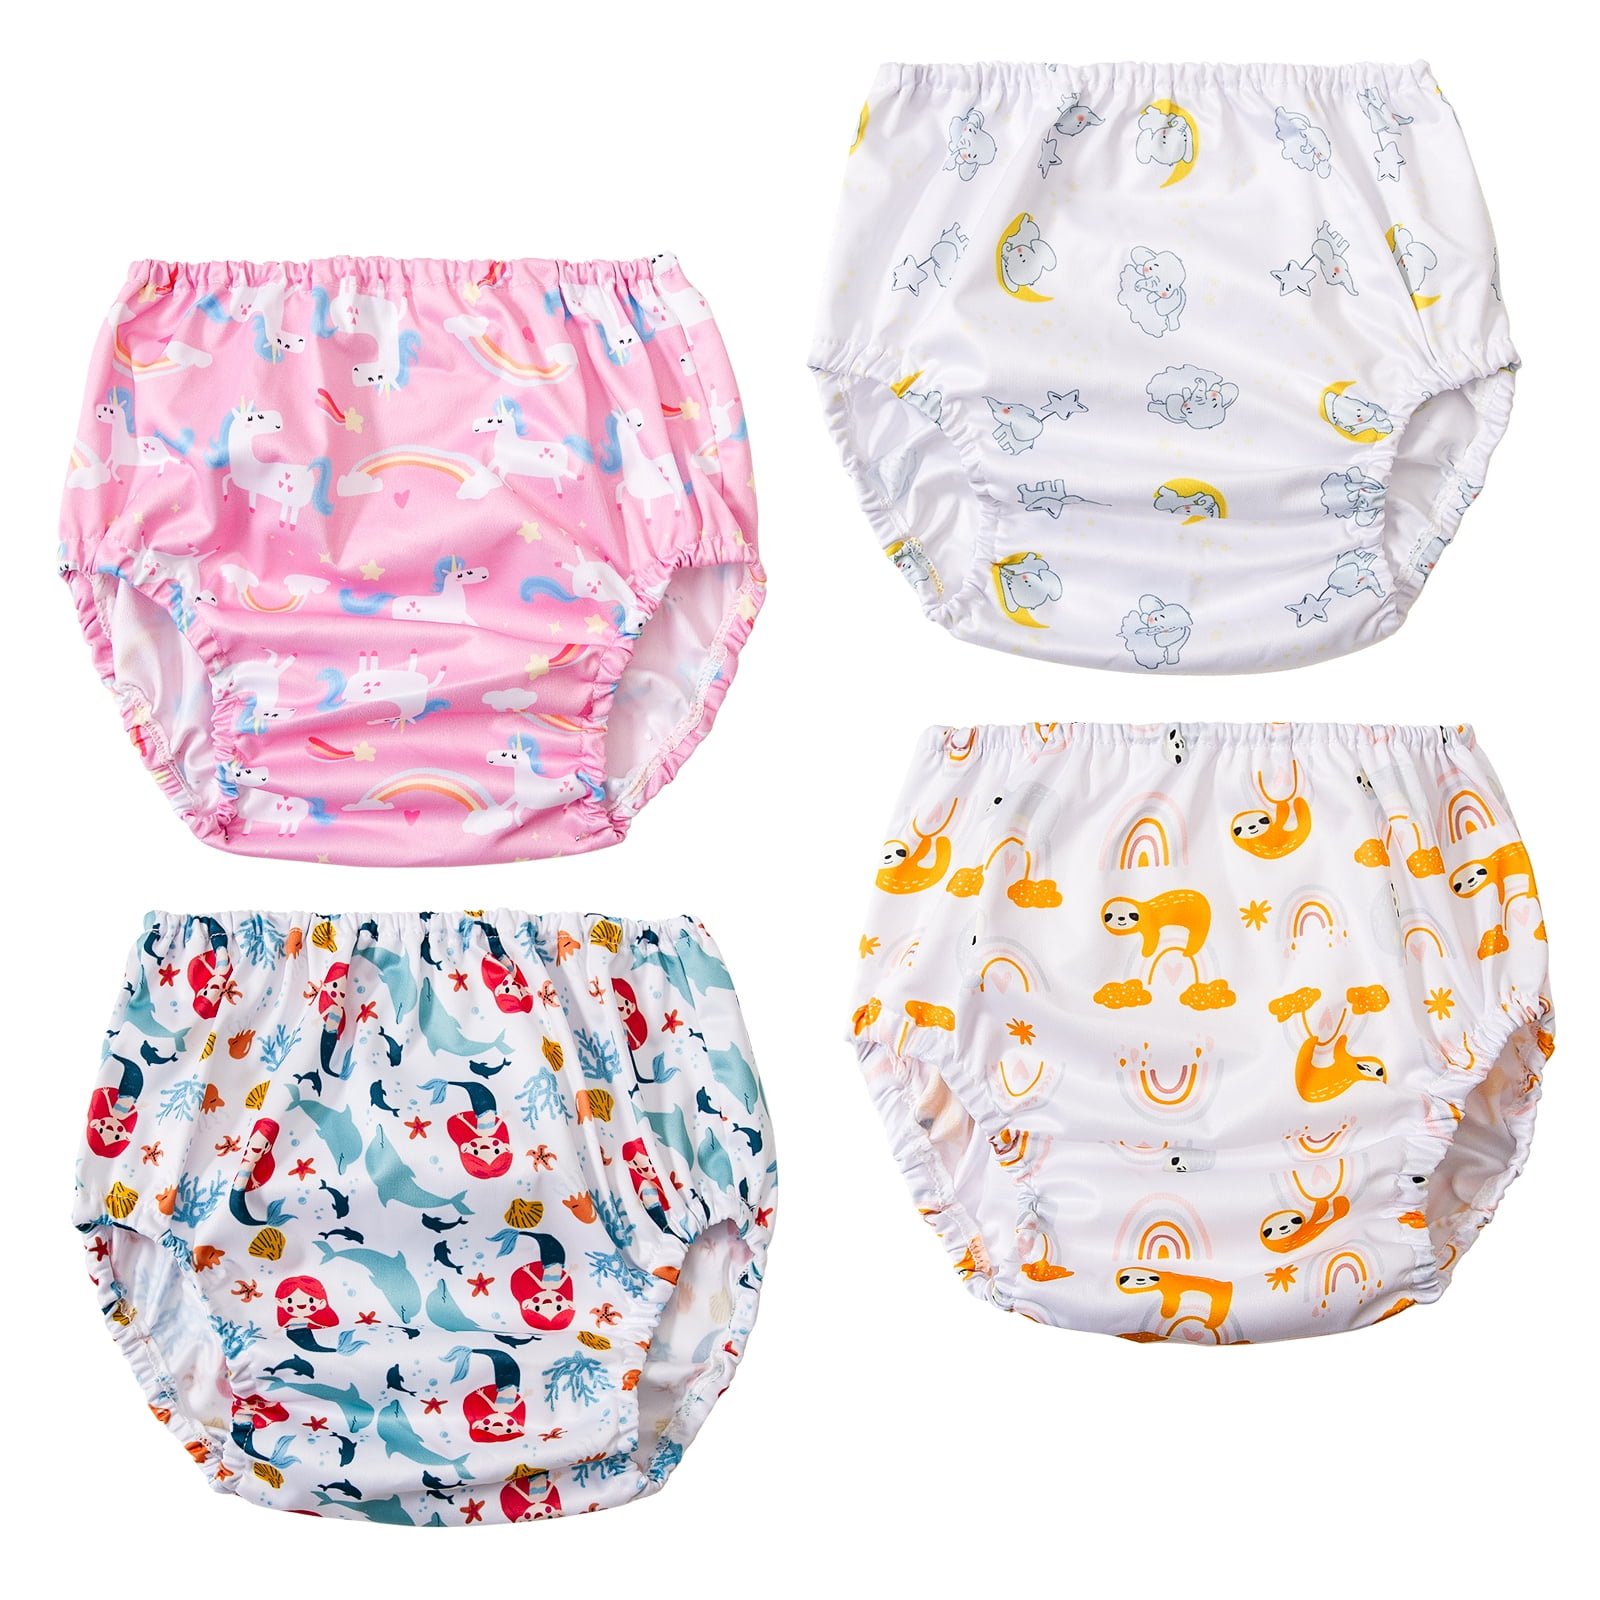 Plastic Underwear Covers for Potty Training Rubber Pants For Babies Plastic  Pants Plastic Underwear Cover Swim Diaper Covers for Toddlers Clothing